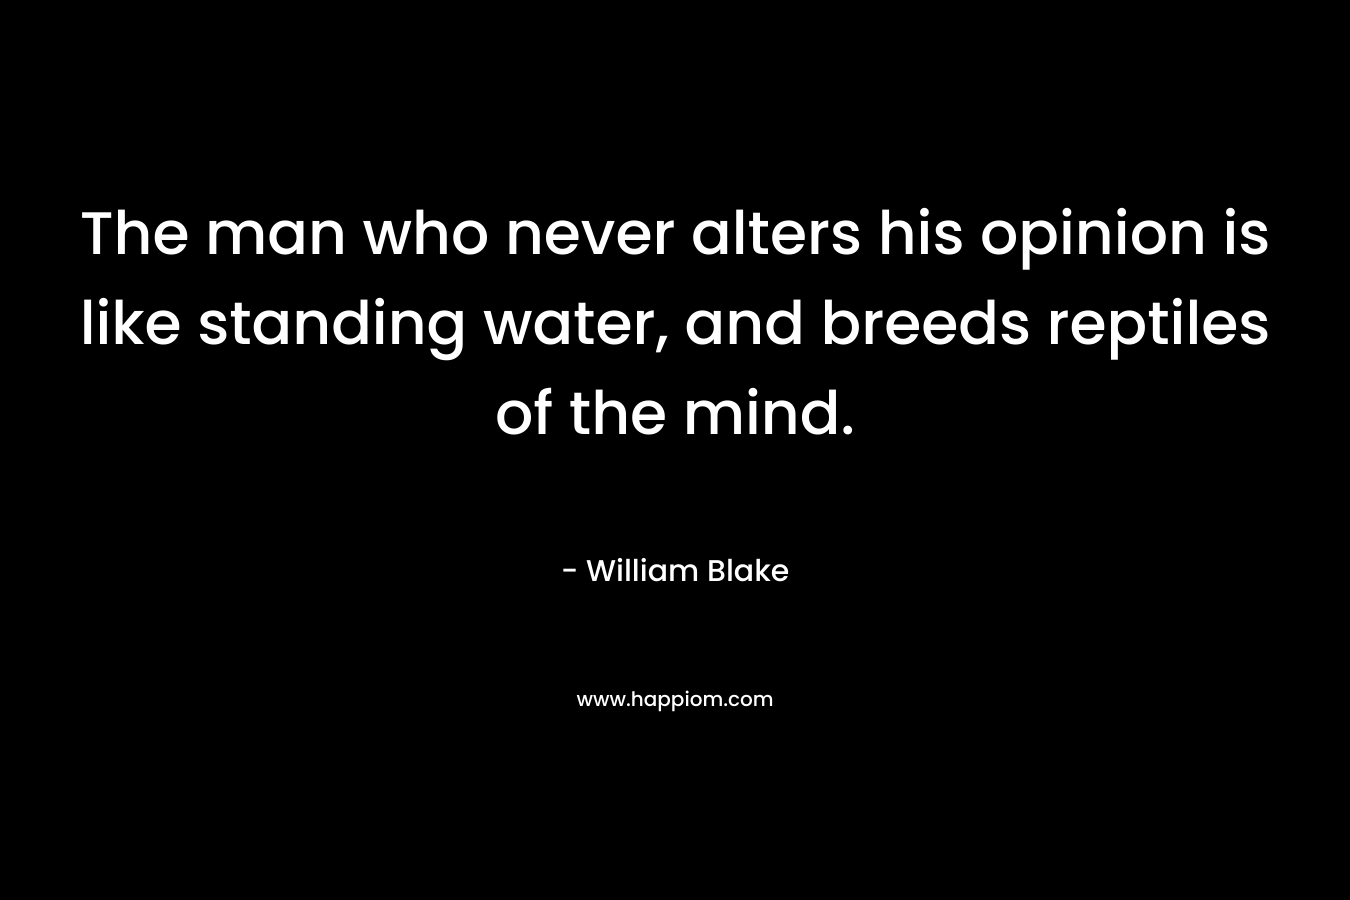 The man who never alters his opinion is like standing water, and breeds reptiles of the mind. – William Blake